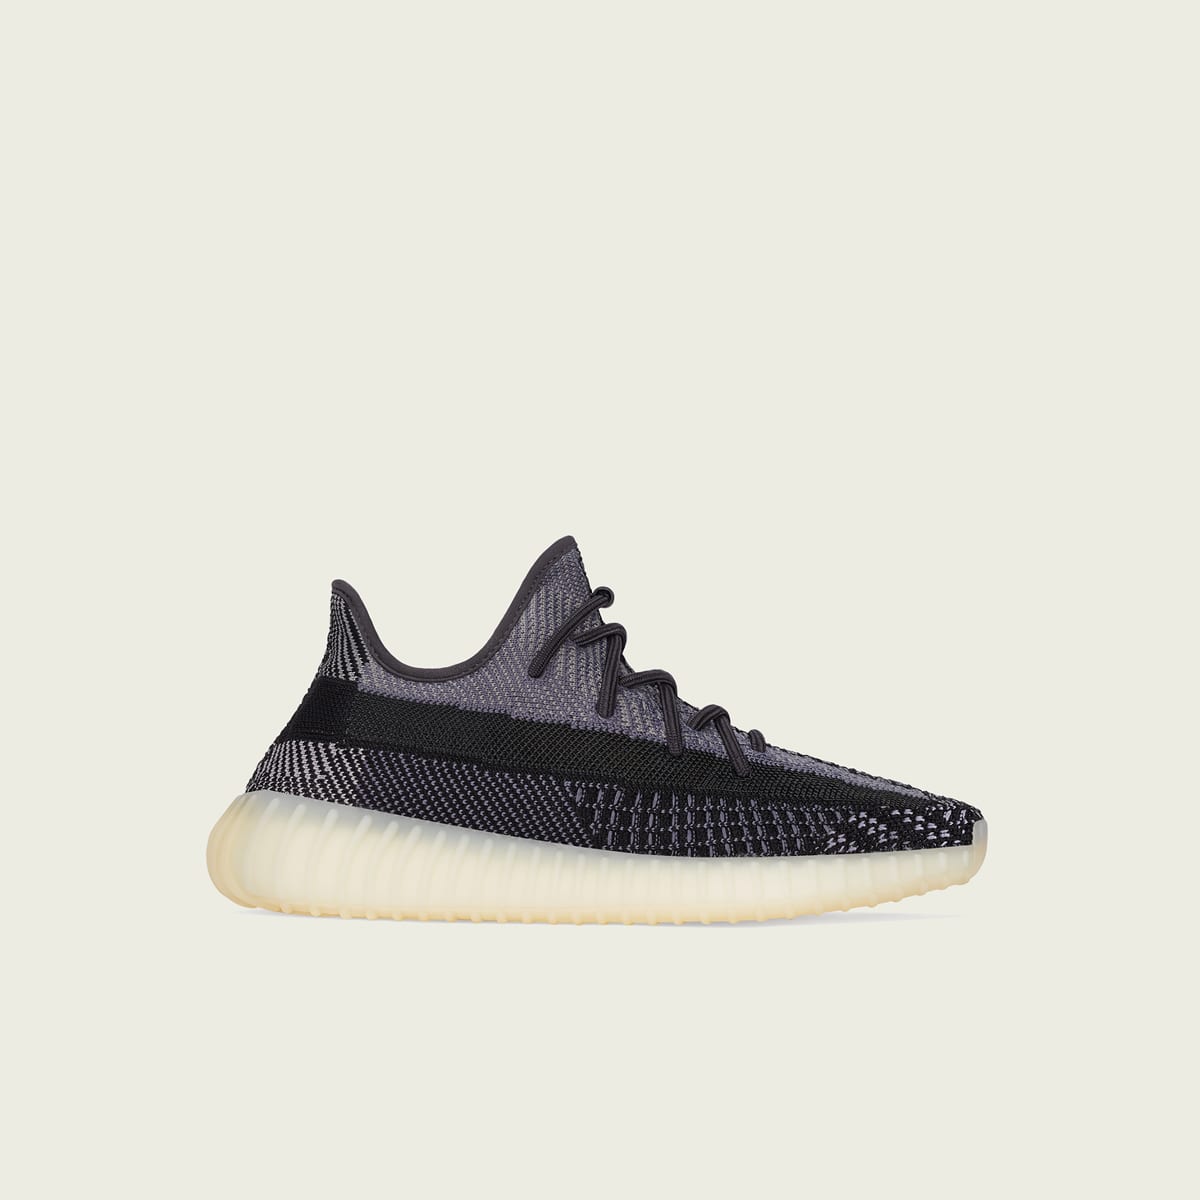 Yeezy Boost 350 V2 (Carbon) | END. Launches